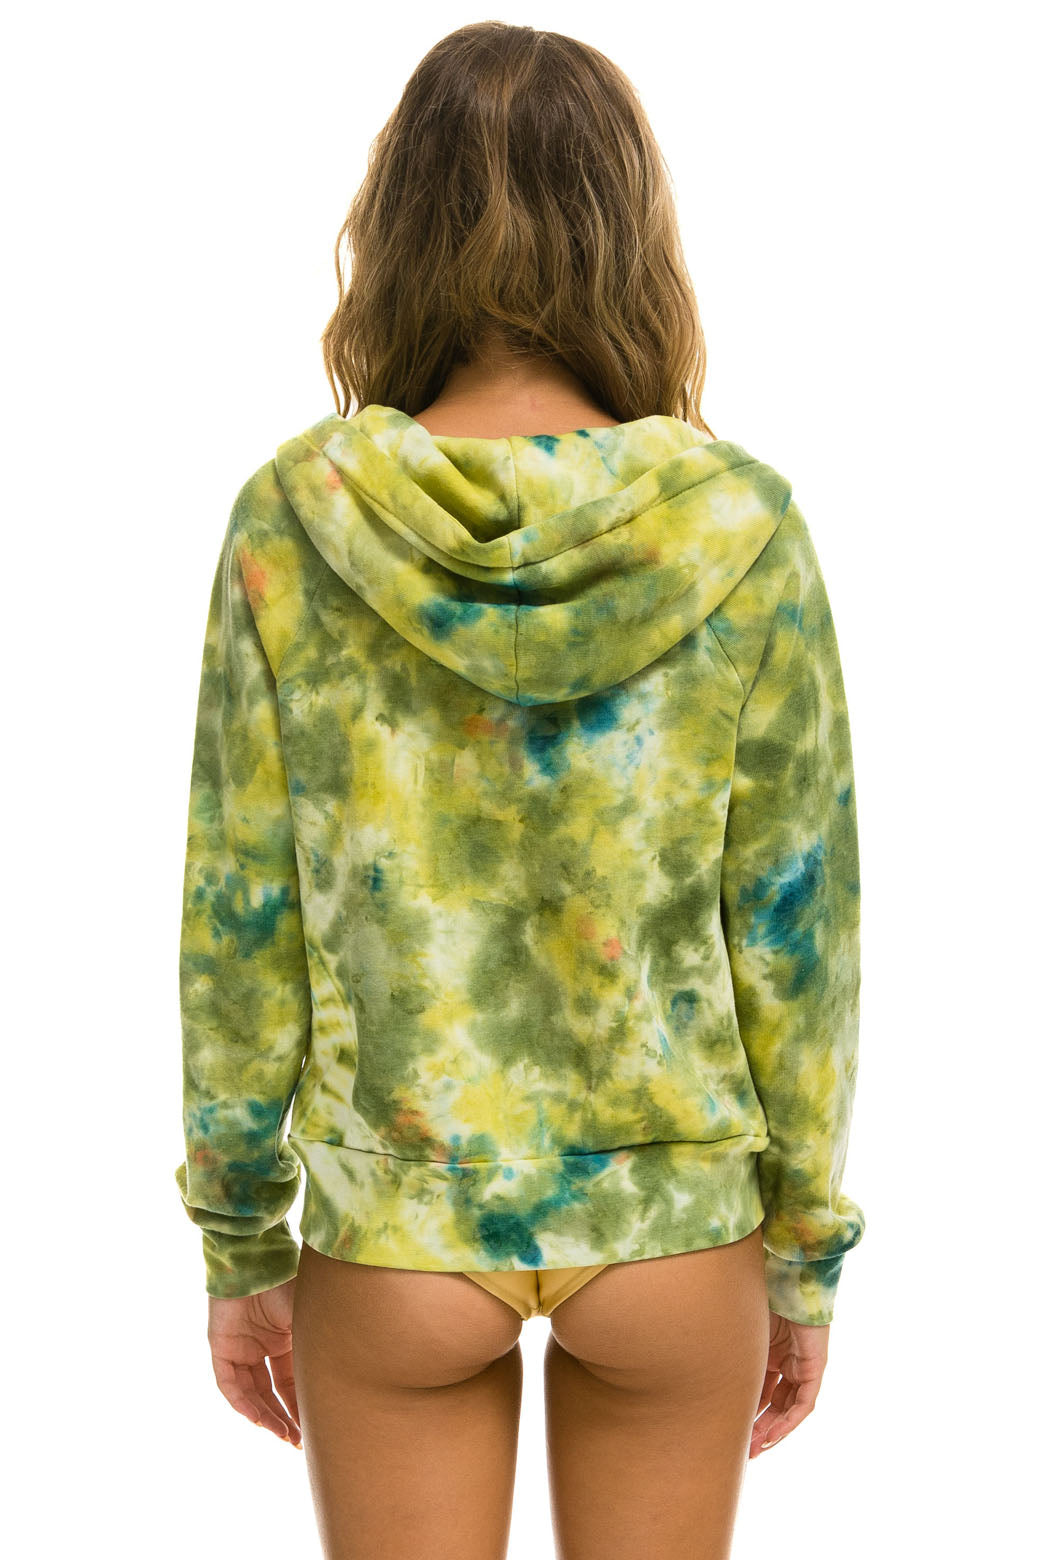 Aviator Nation Relaxed Hand Dyed Zip Hoodie - Tie Dye Green Yellow L